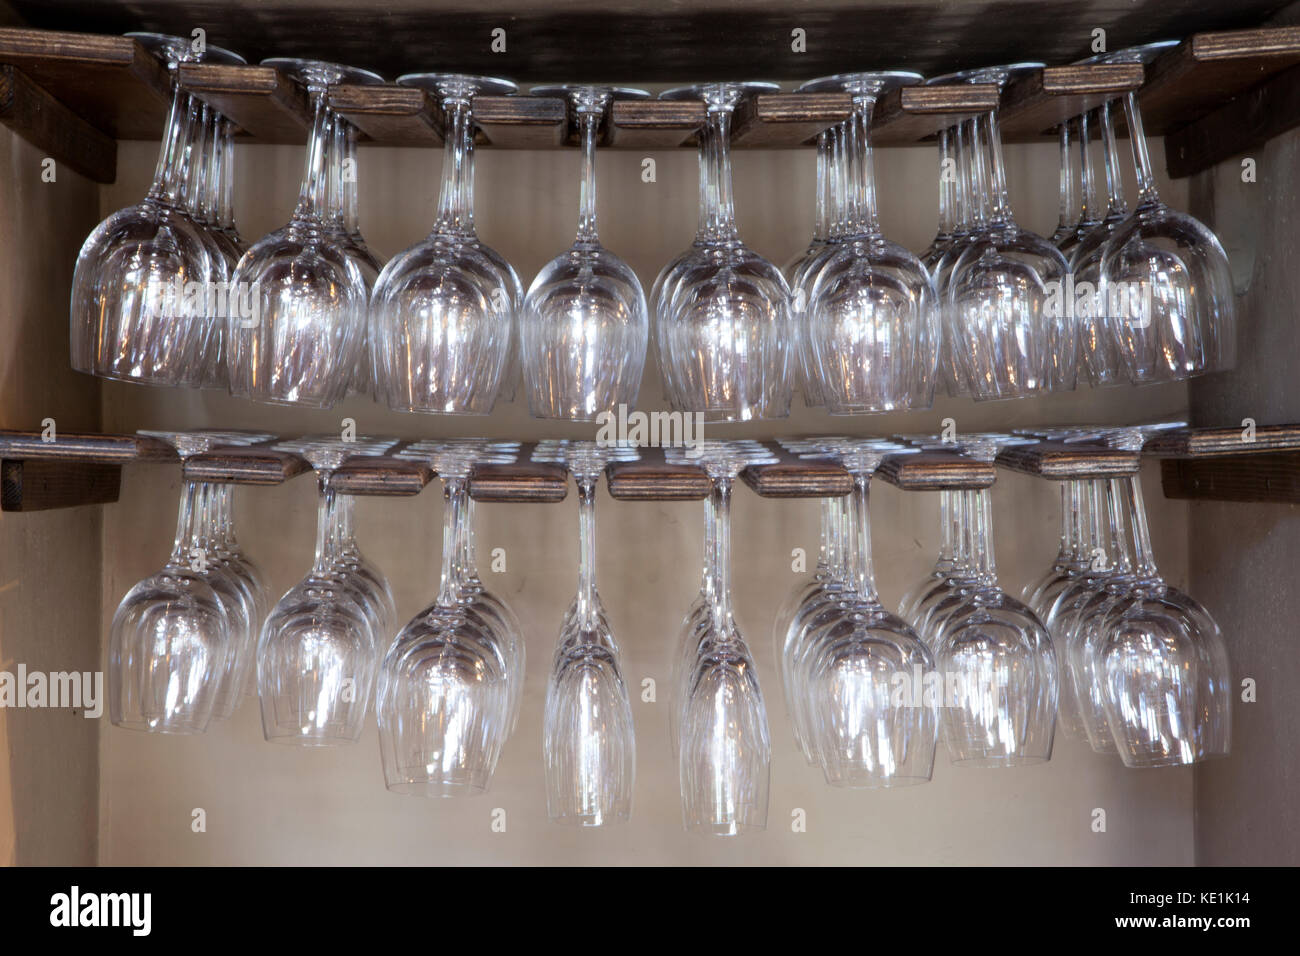 A rack holding wine glasses in a pub in Wiltshire, England. Stock Photo